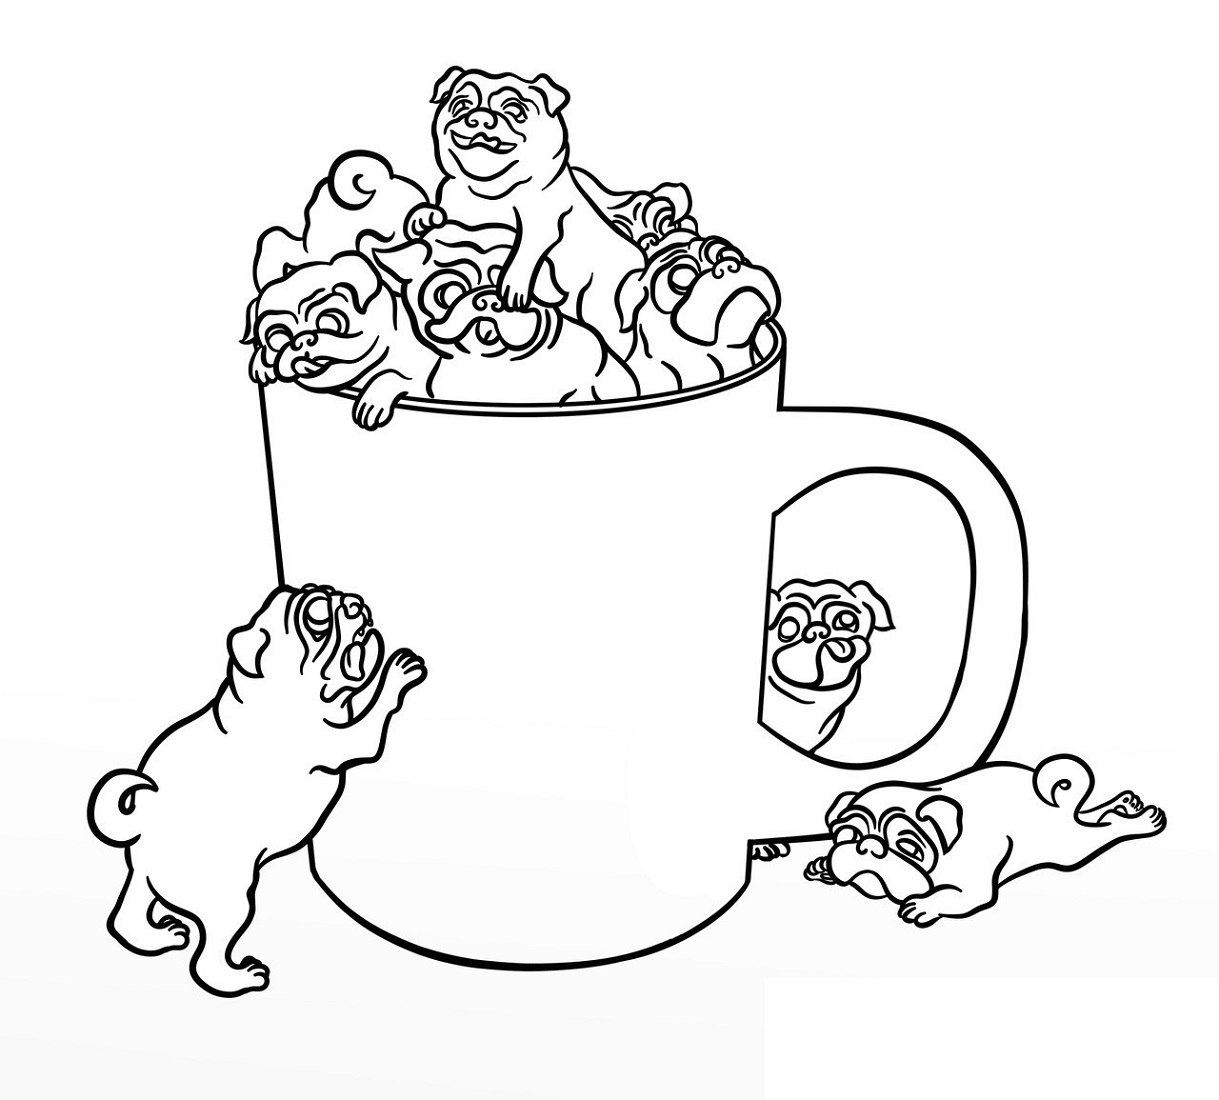 Tumblr Coloring Pages | Printable Shelter